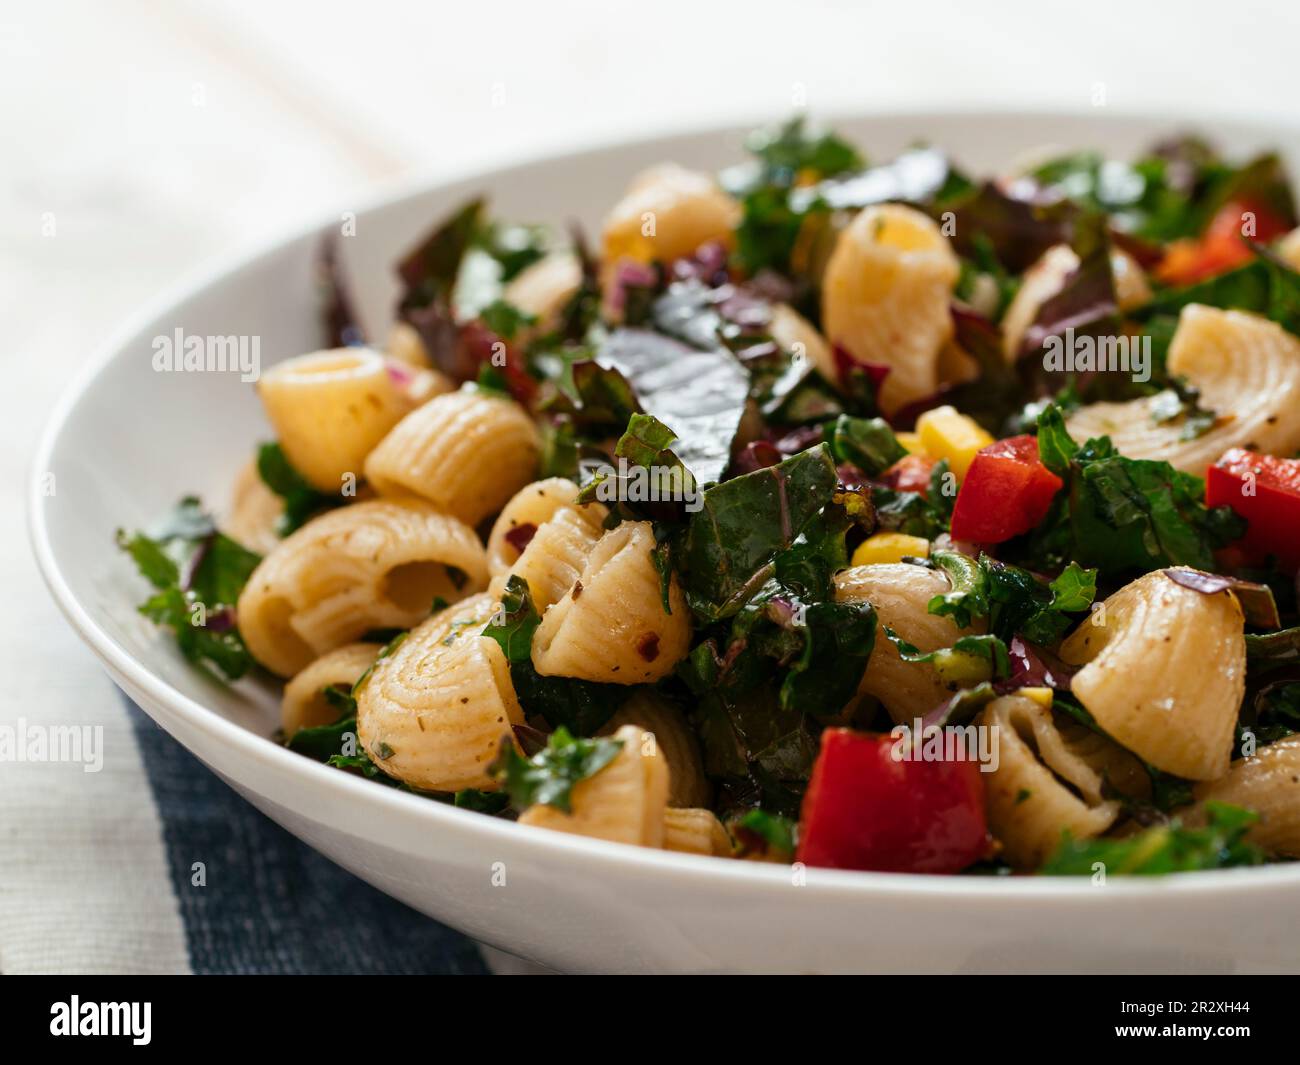 Bowl with a vegan home made kale pasta salad using the heirloom variety 'Red Russian'. Stock Photo